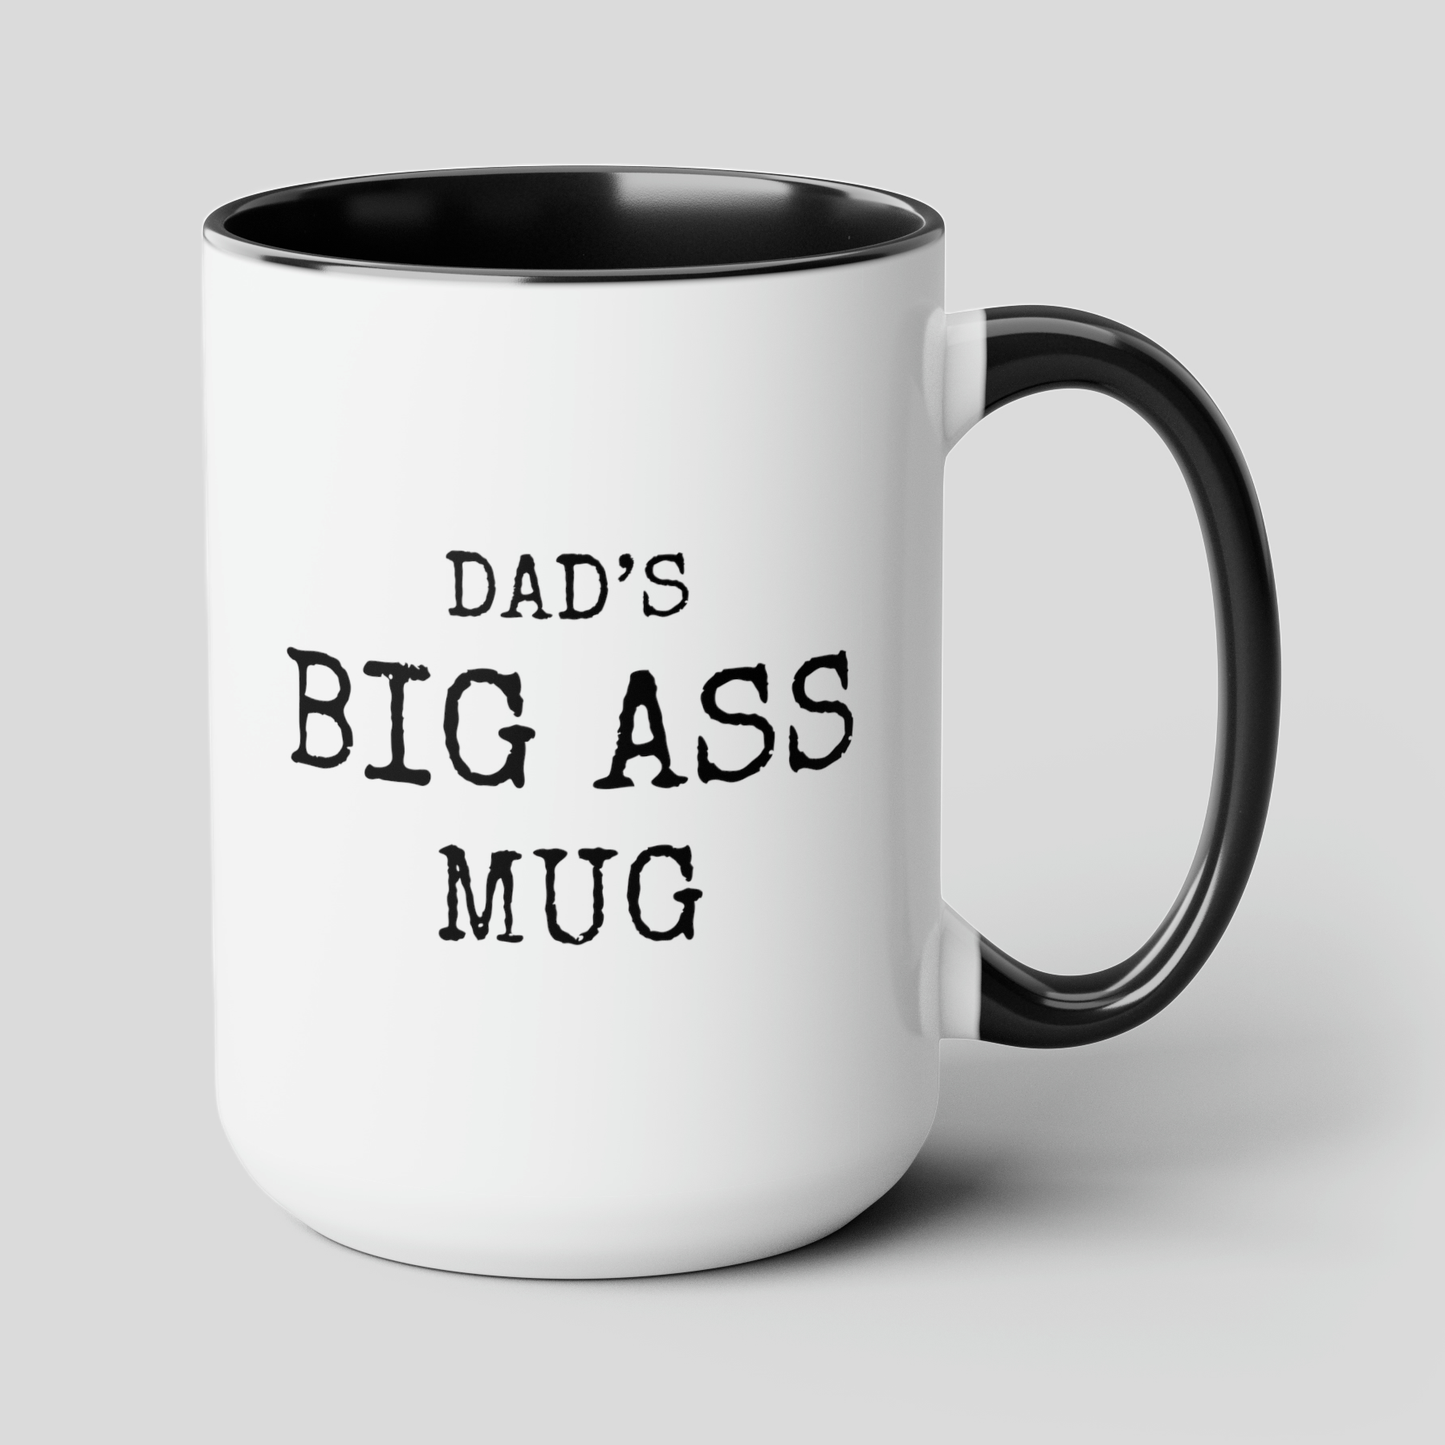 Dad's Big Ass Mug 15oz white with black accent funny large coffee mug gift for fathers day custom name waveywares wavey wares wavywares wavy wares cover